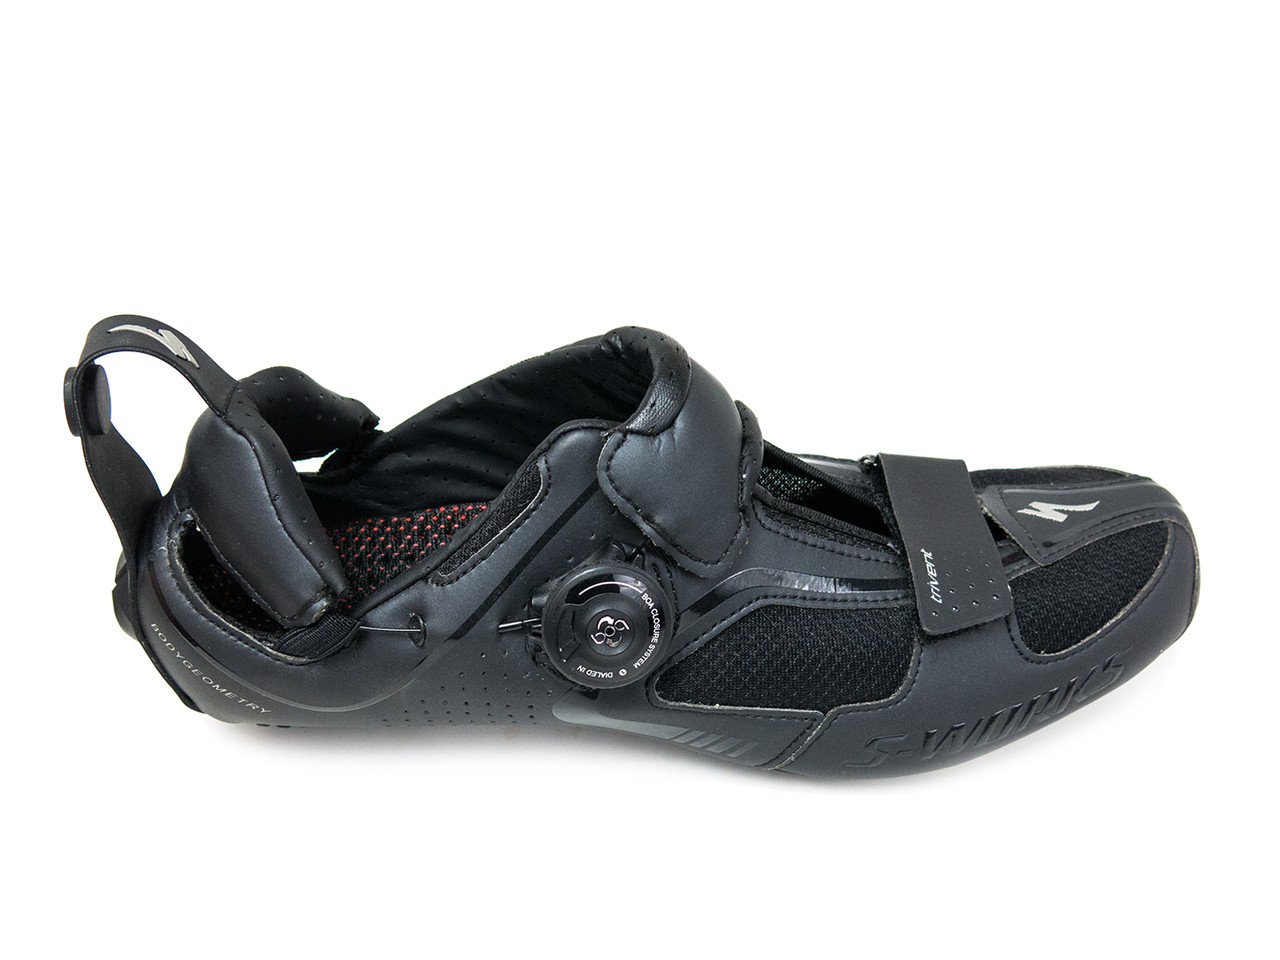 specialised tri shoes